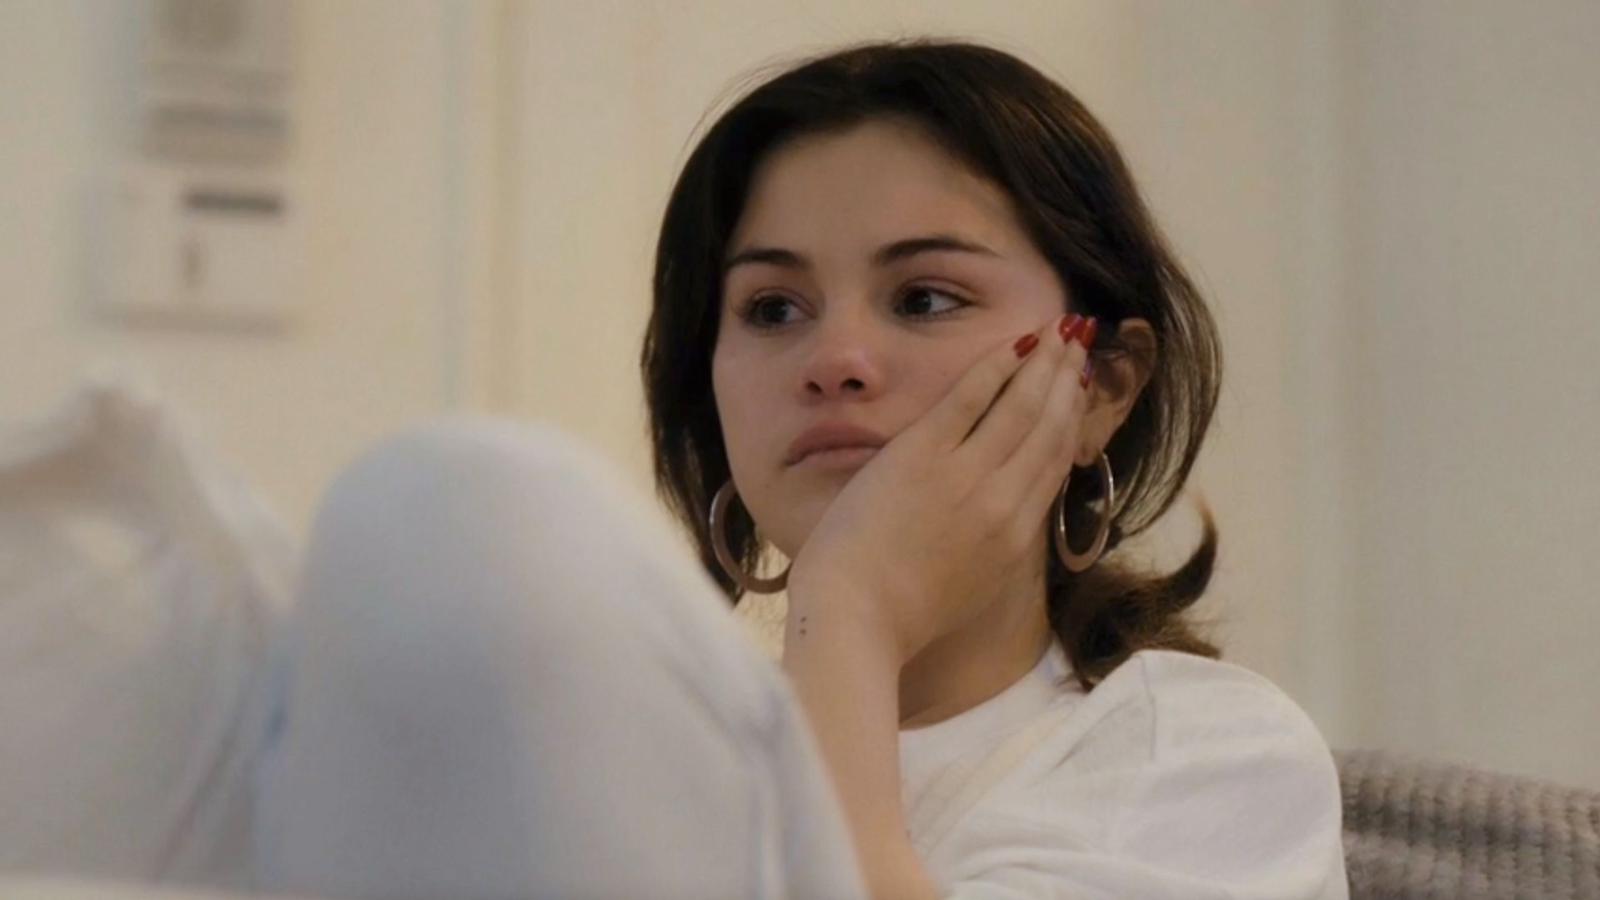 Selena Gomez documentary shows the star during the vulnerable moments